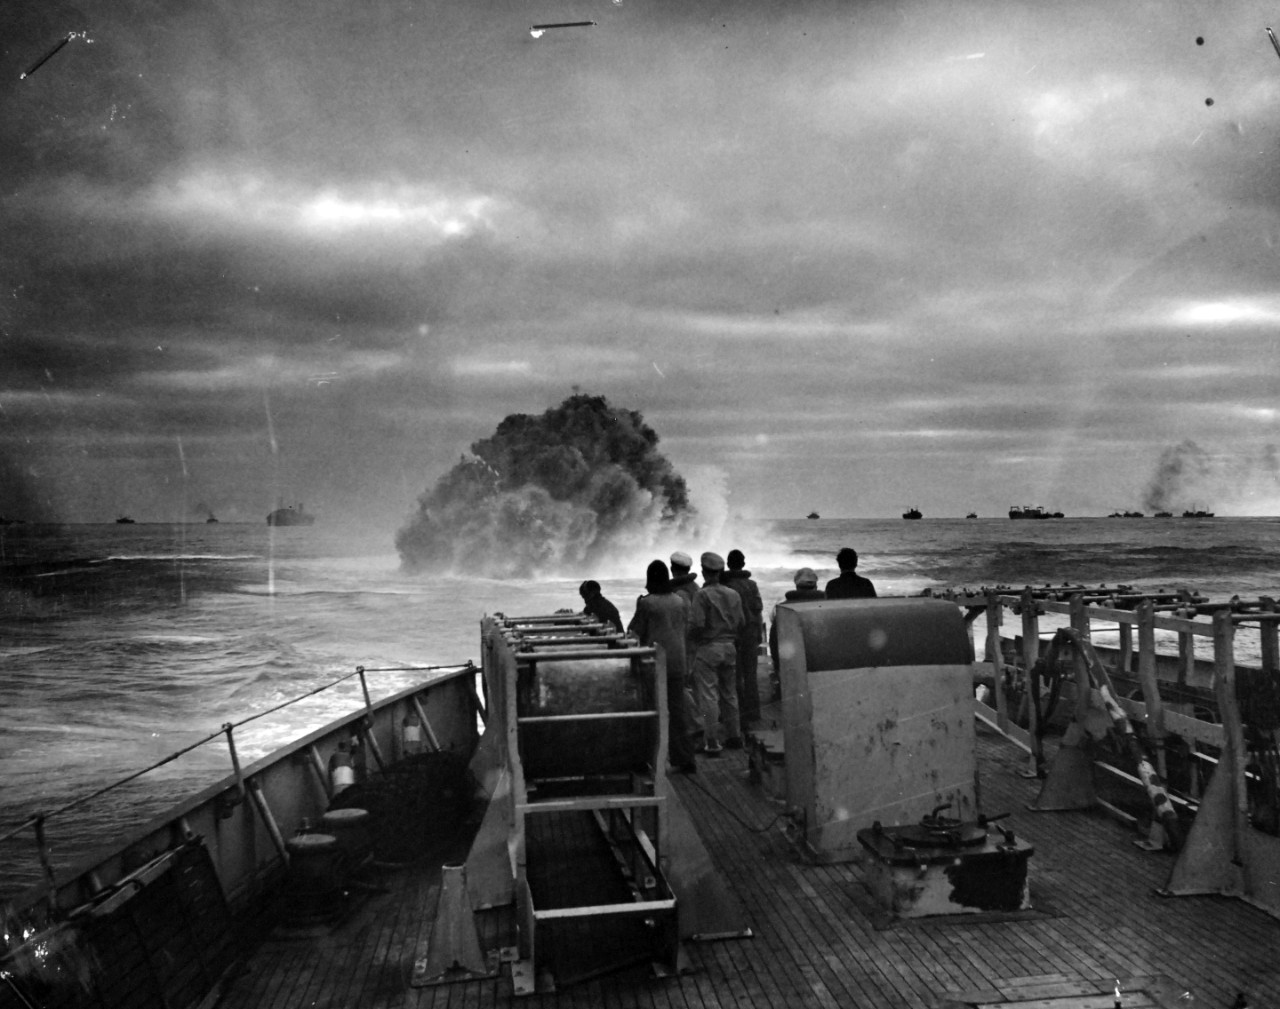 26-G-1517:  Sinking of German submarine U-175, April  1943.   The submarine was sunk off south-west of Ireland by USCGC Spencer (WPG-36) on April 17, 1943.  Official Caption: "COAST GUARD CUTTER SINKS SUB: Coast Guardsmen on the deck of the U.S. Coast Guard Cutter USCGC SPENCER (WPG-36) watch the explosion of a depth charge which blasted a Nazi U-Boat's hope of breaking into the center of a large convoy.  The depth charge tossed from the 327-foot cutter blew the submarine to the surface, where it was engaged by Coast Guardsmen.  Ships of the convoy may be seen in the background."  Date: 17 April 1943.  Official U.S. Coast Guard Photograph, now in the collections of the National Archives.  (2017/09/05).